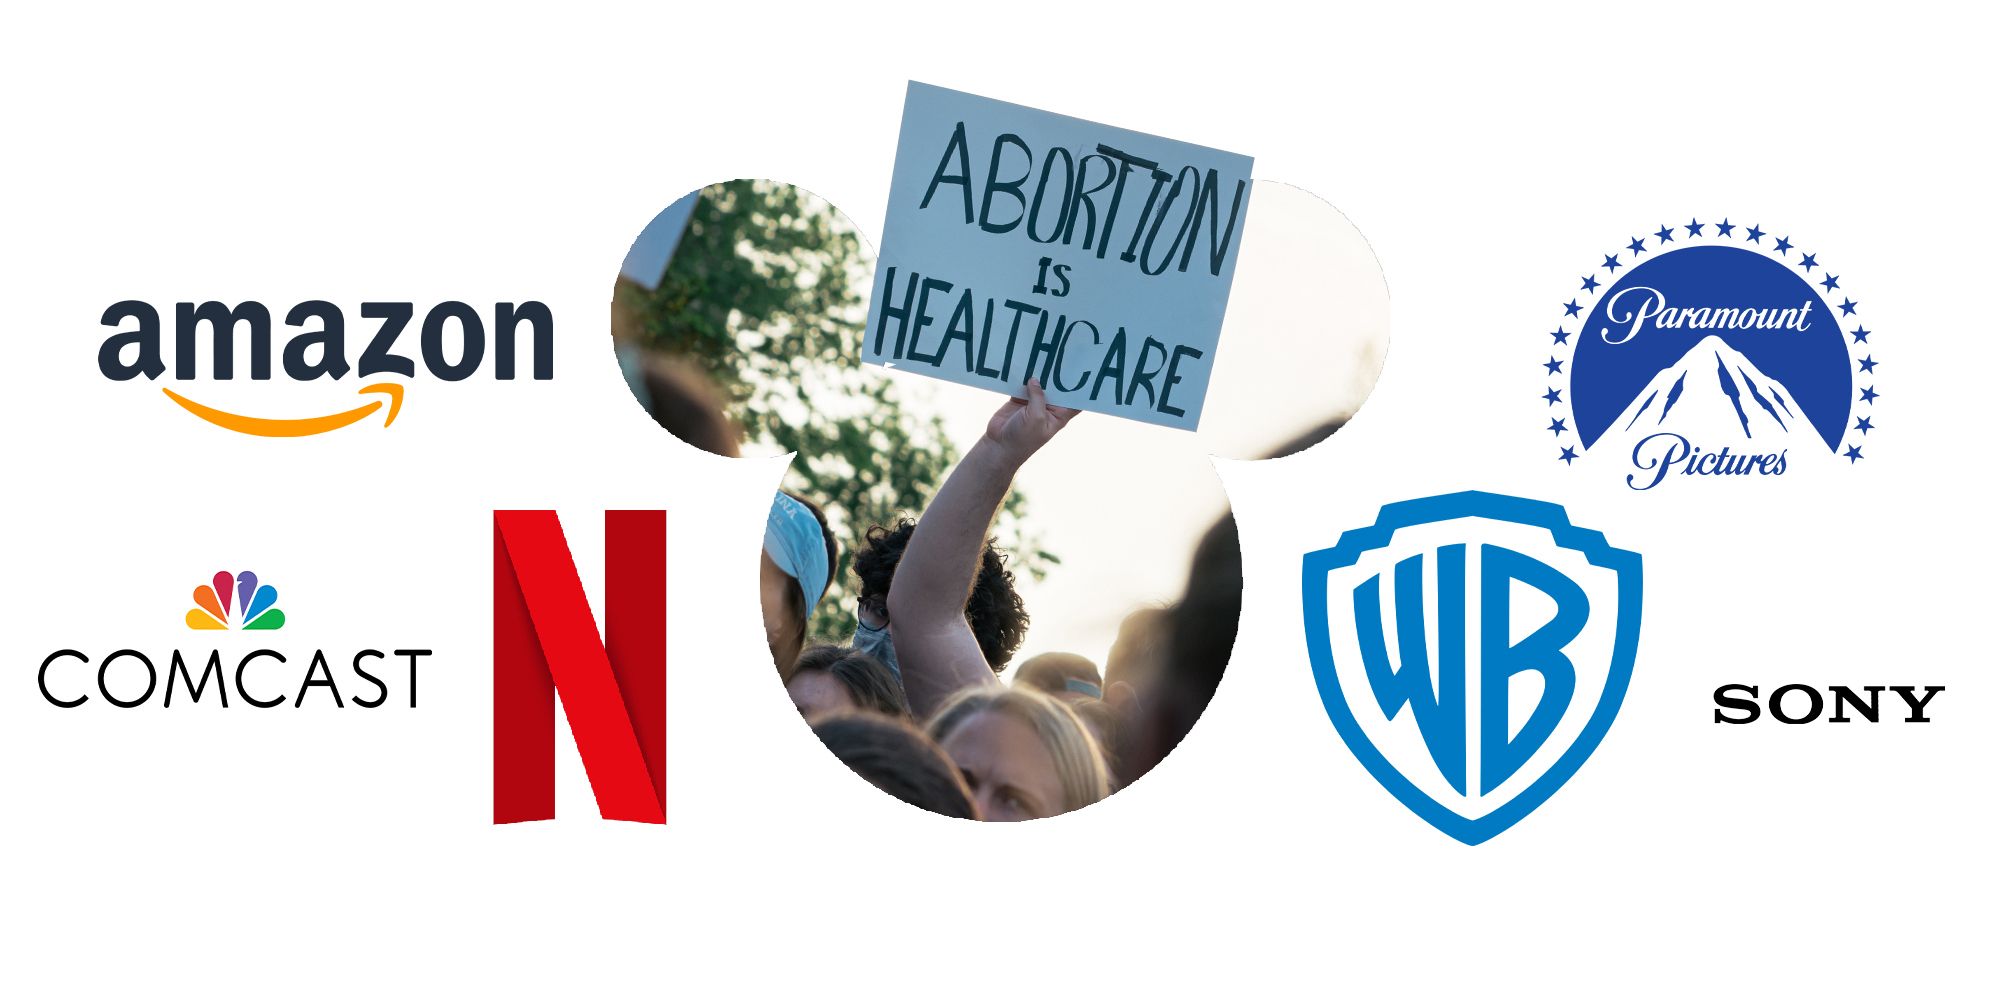 Various company logos, with a sign in the middle reading: "Abortion is healthcare"